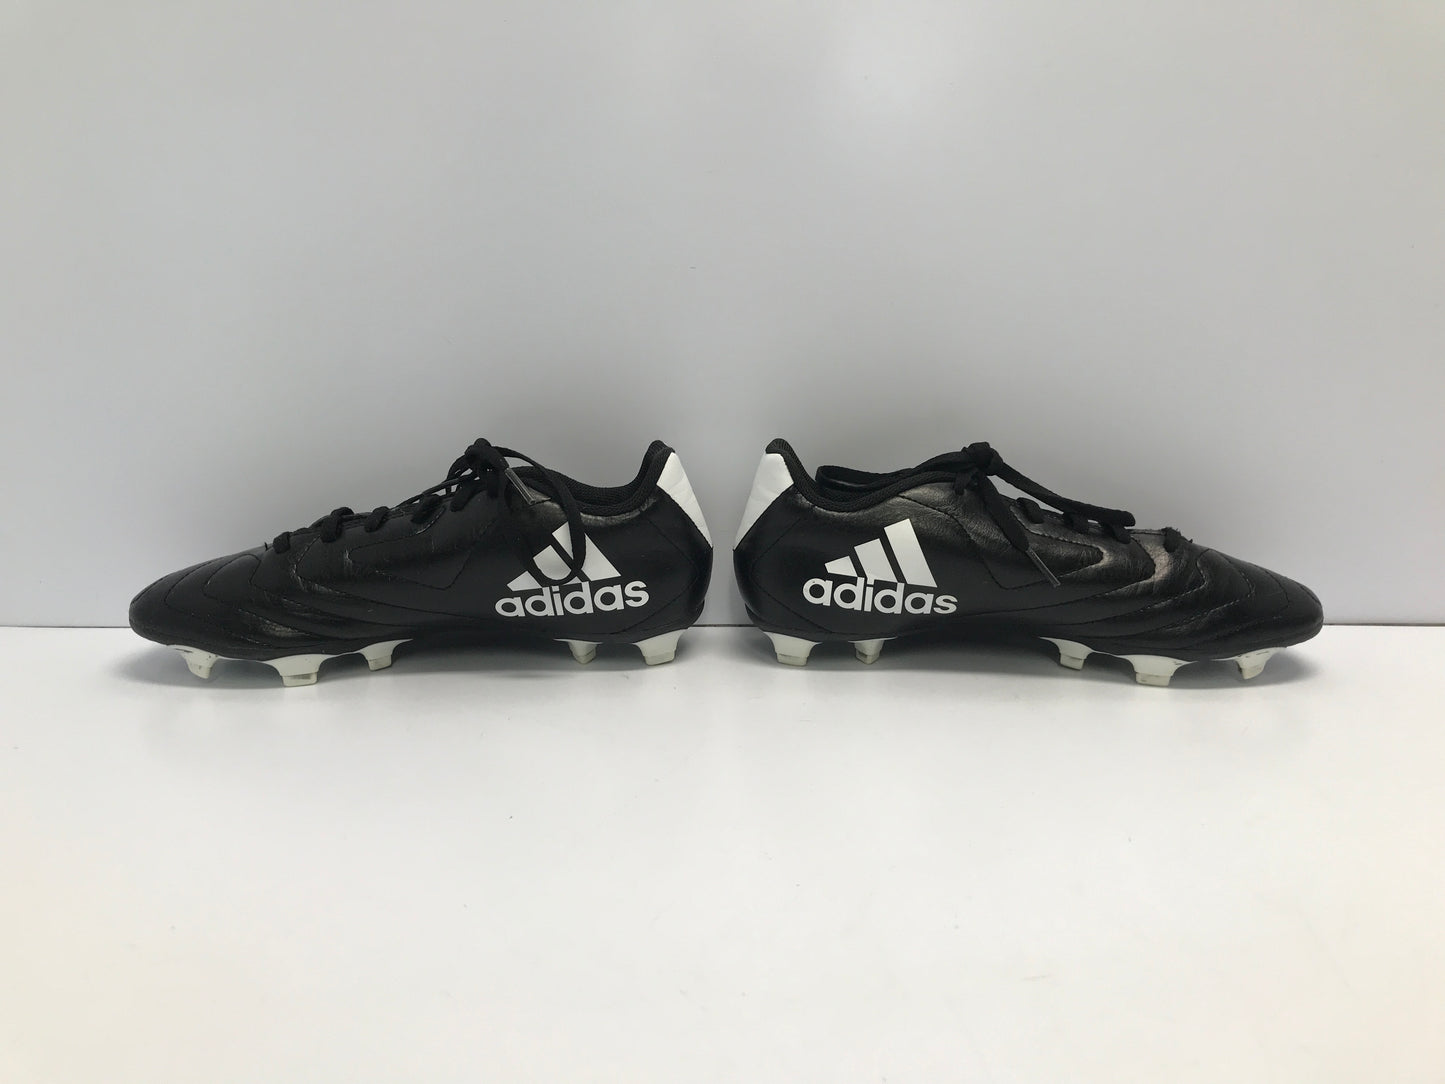 Soccer Shoes Cleats Men's Size 7 Adidas Black White Like New